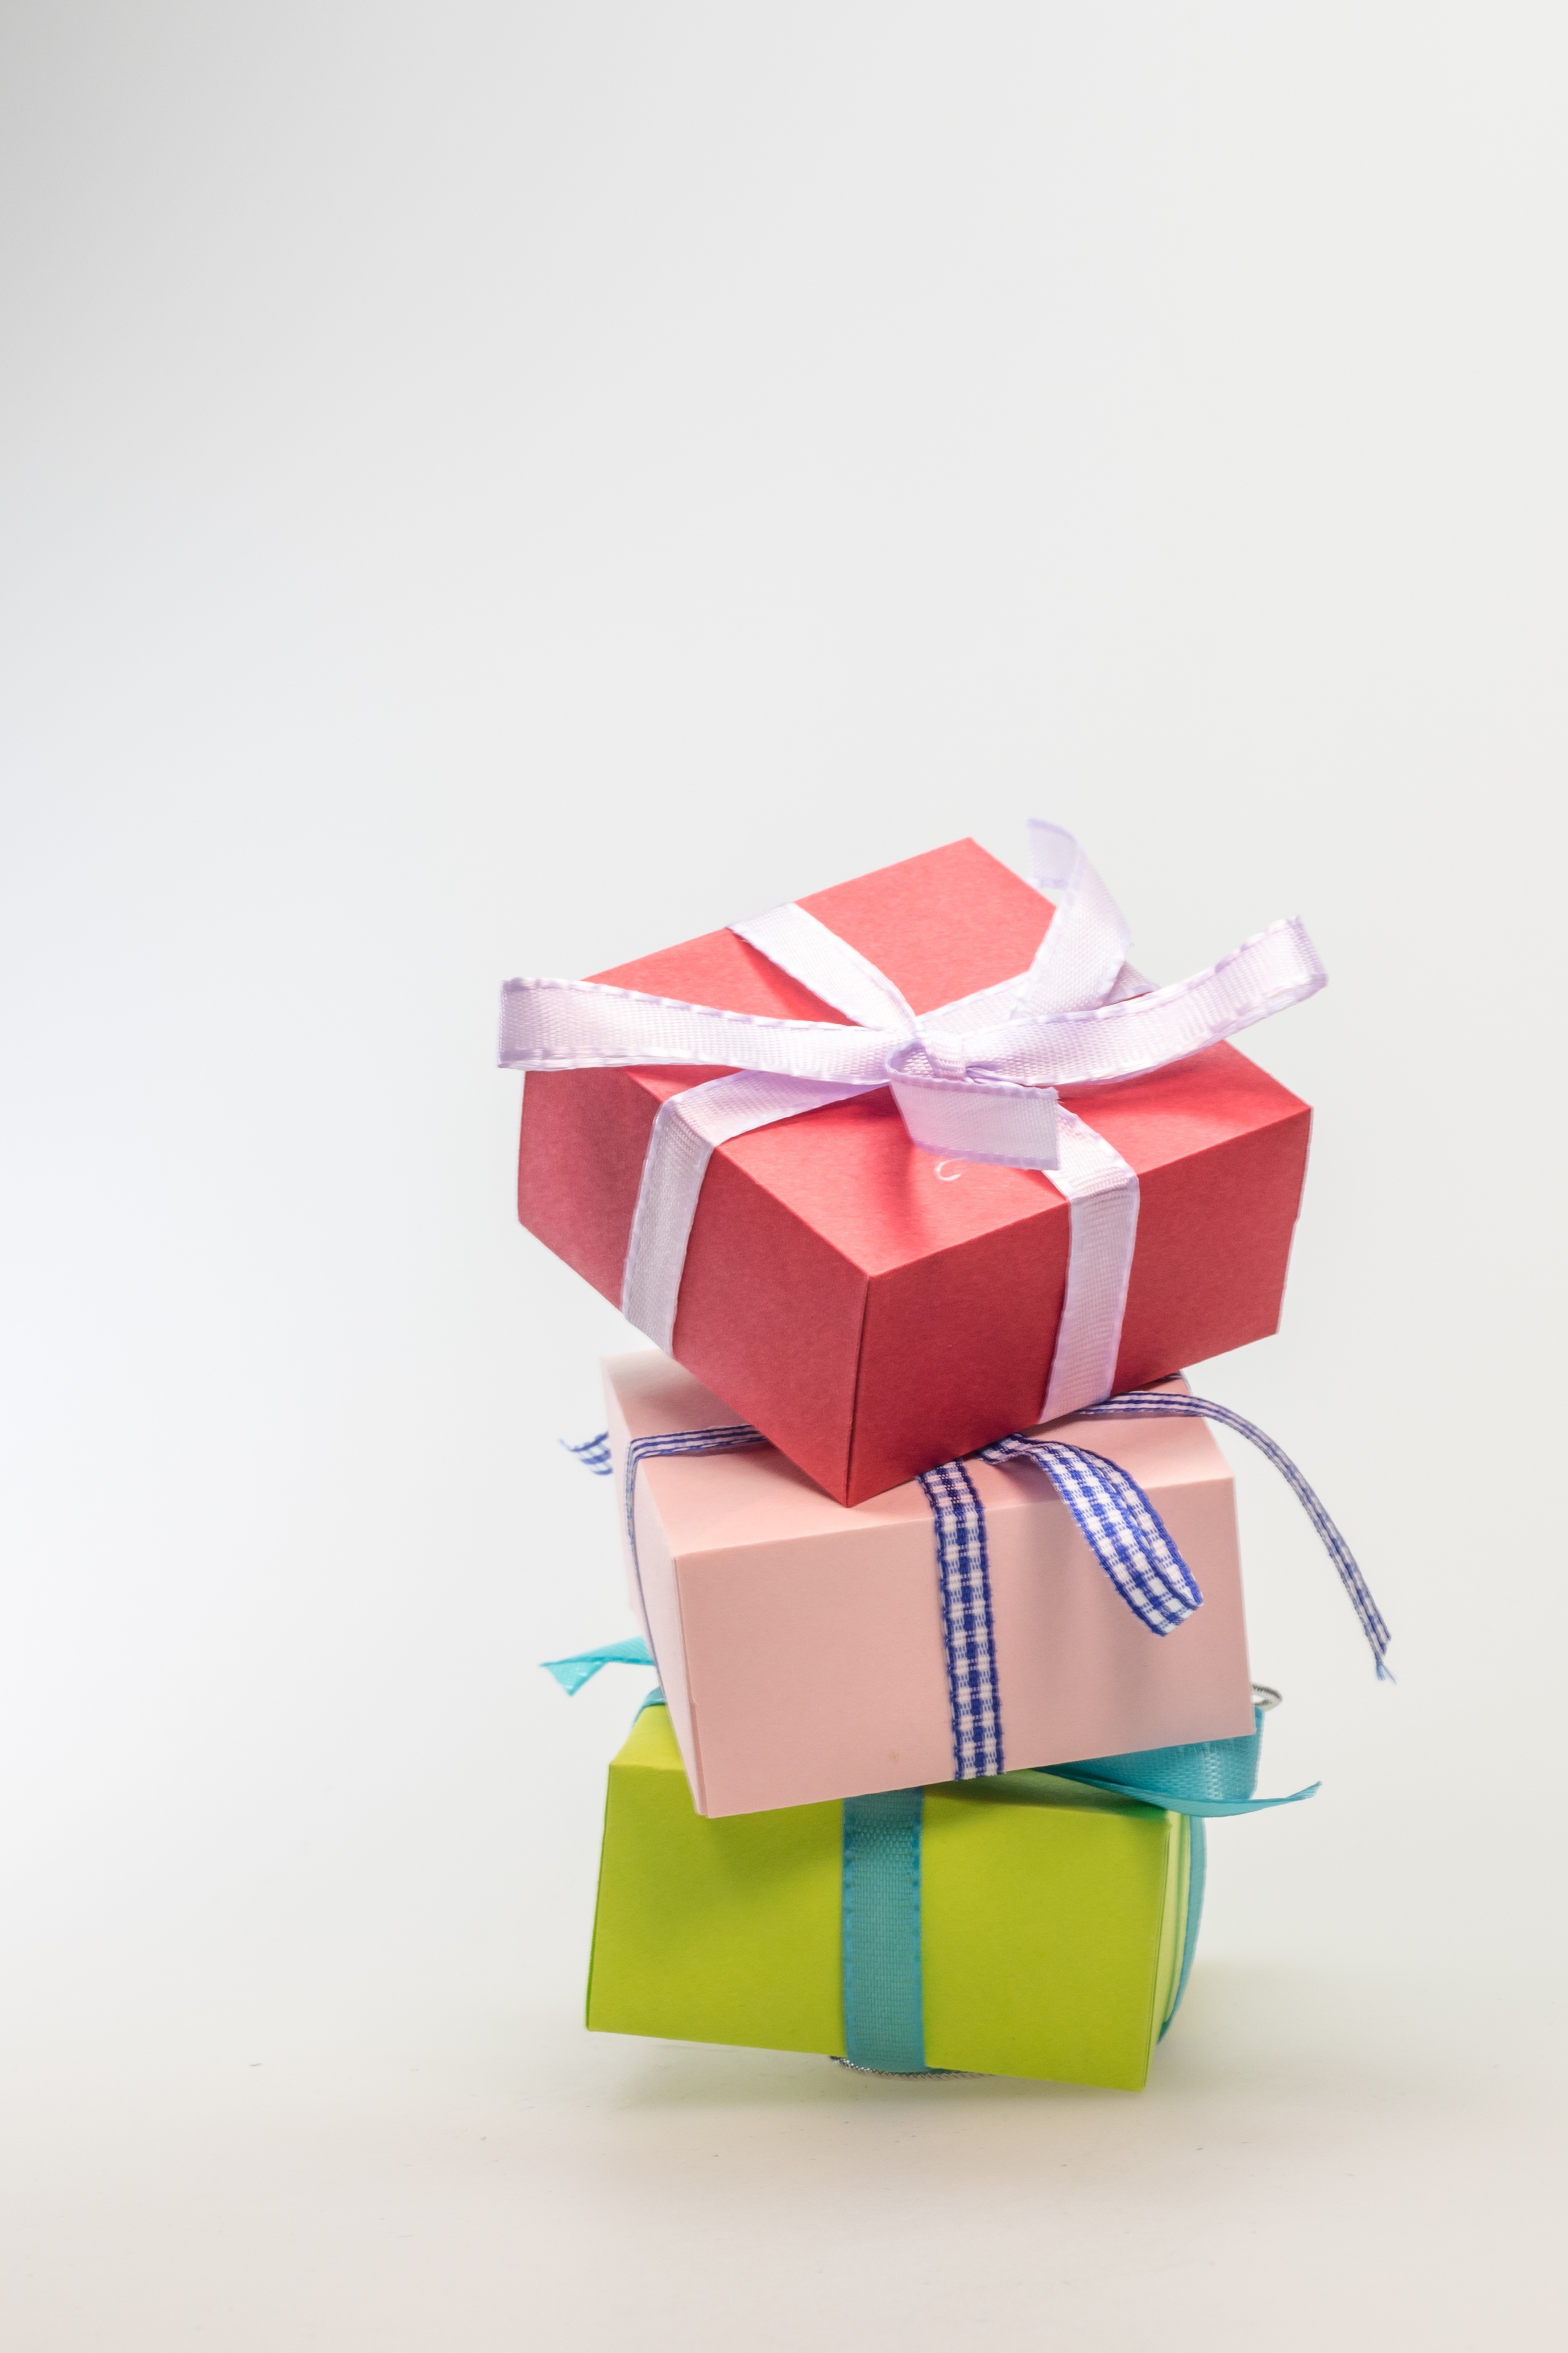 Free photo Gifts in a box on a white background